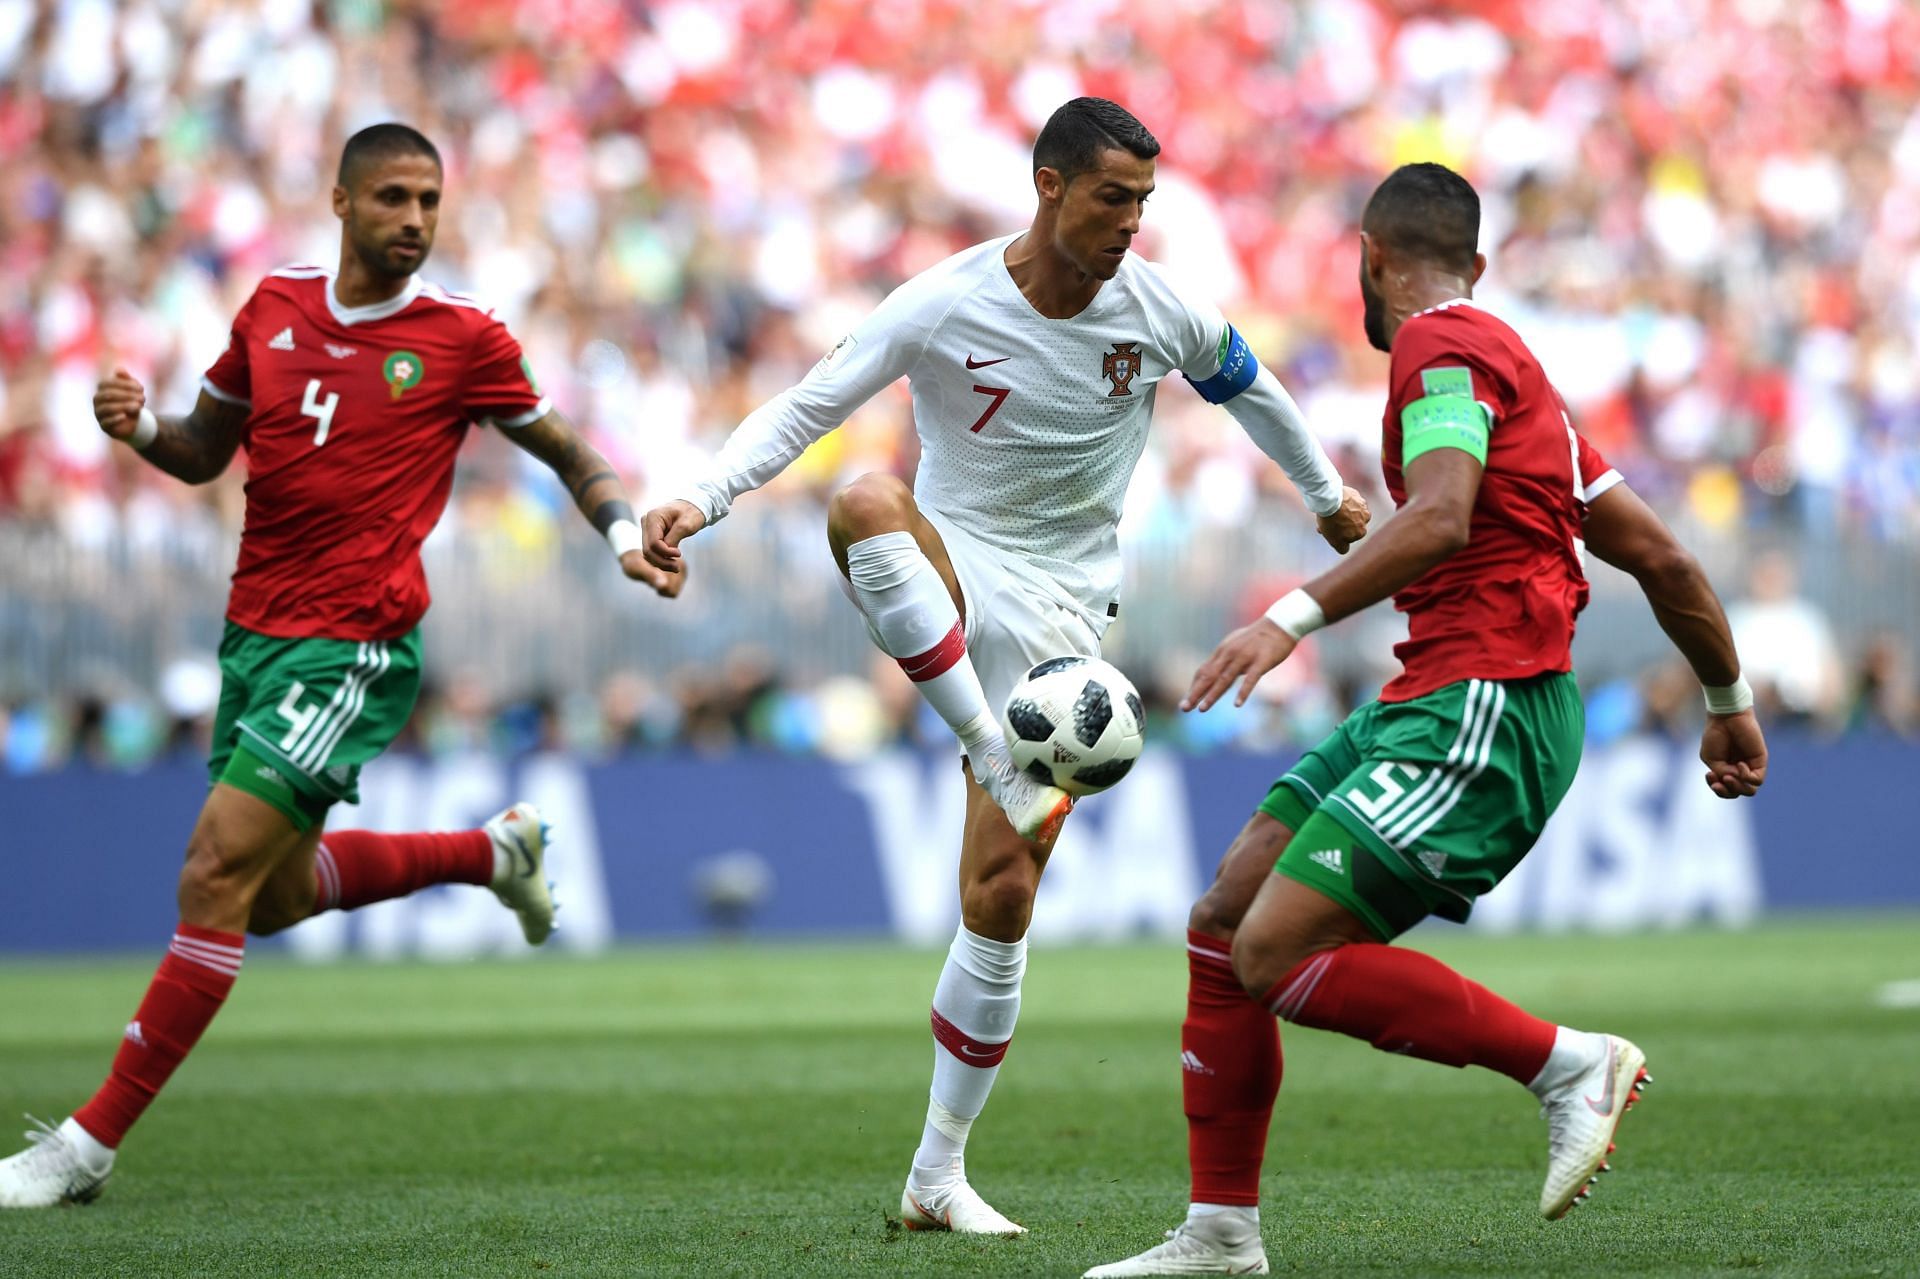 Morocco vs Portugal Head-to-Head stats and numbers you need to know before Match 59 of FIFA World Cup 2022